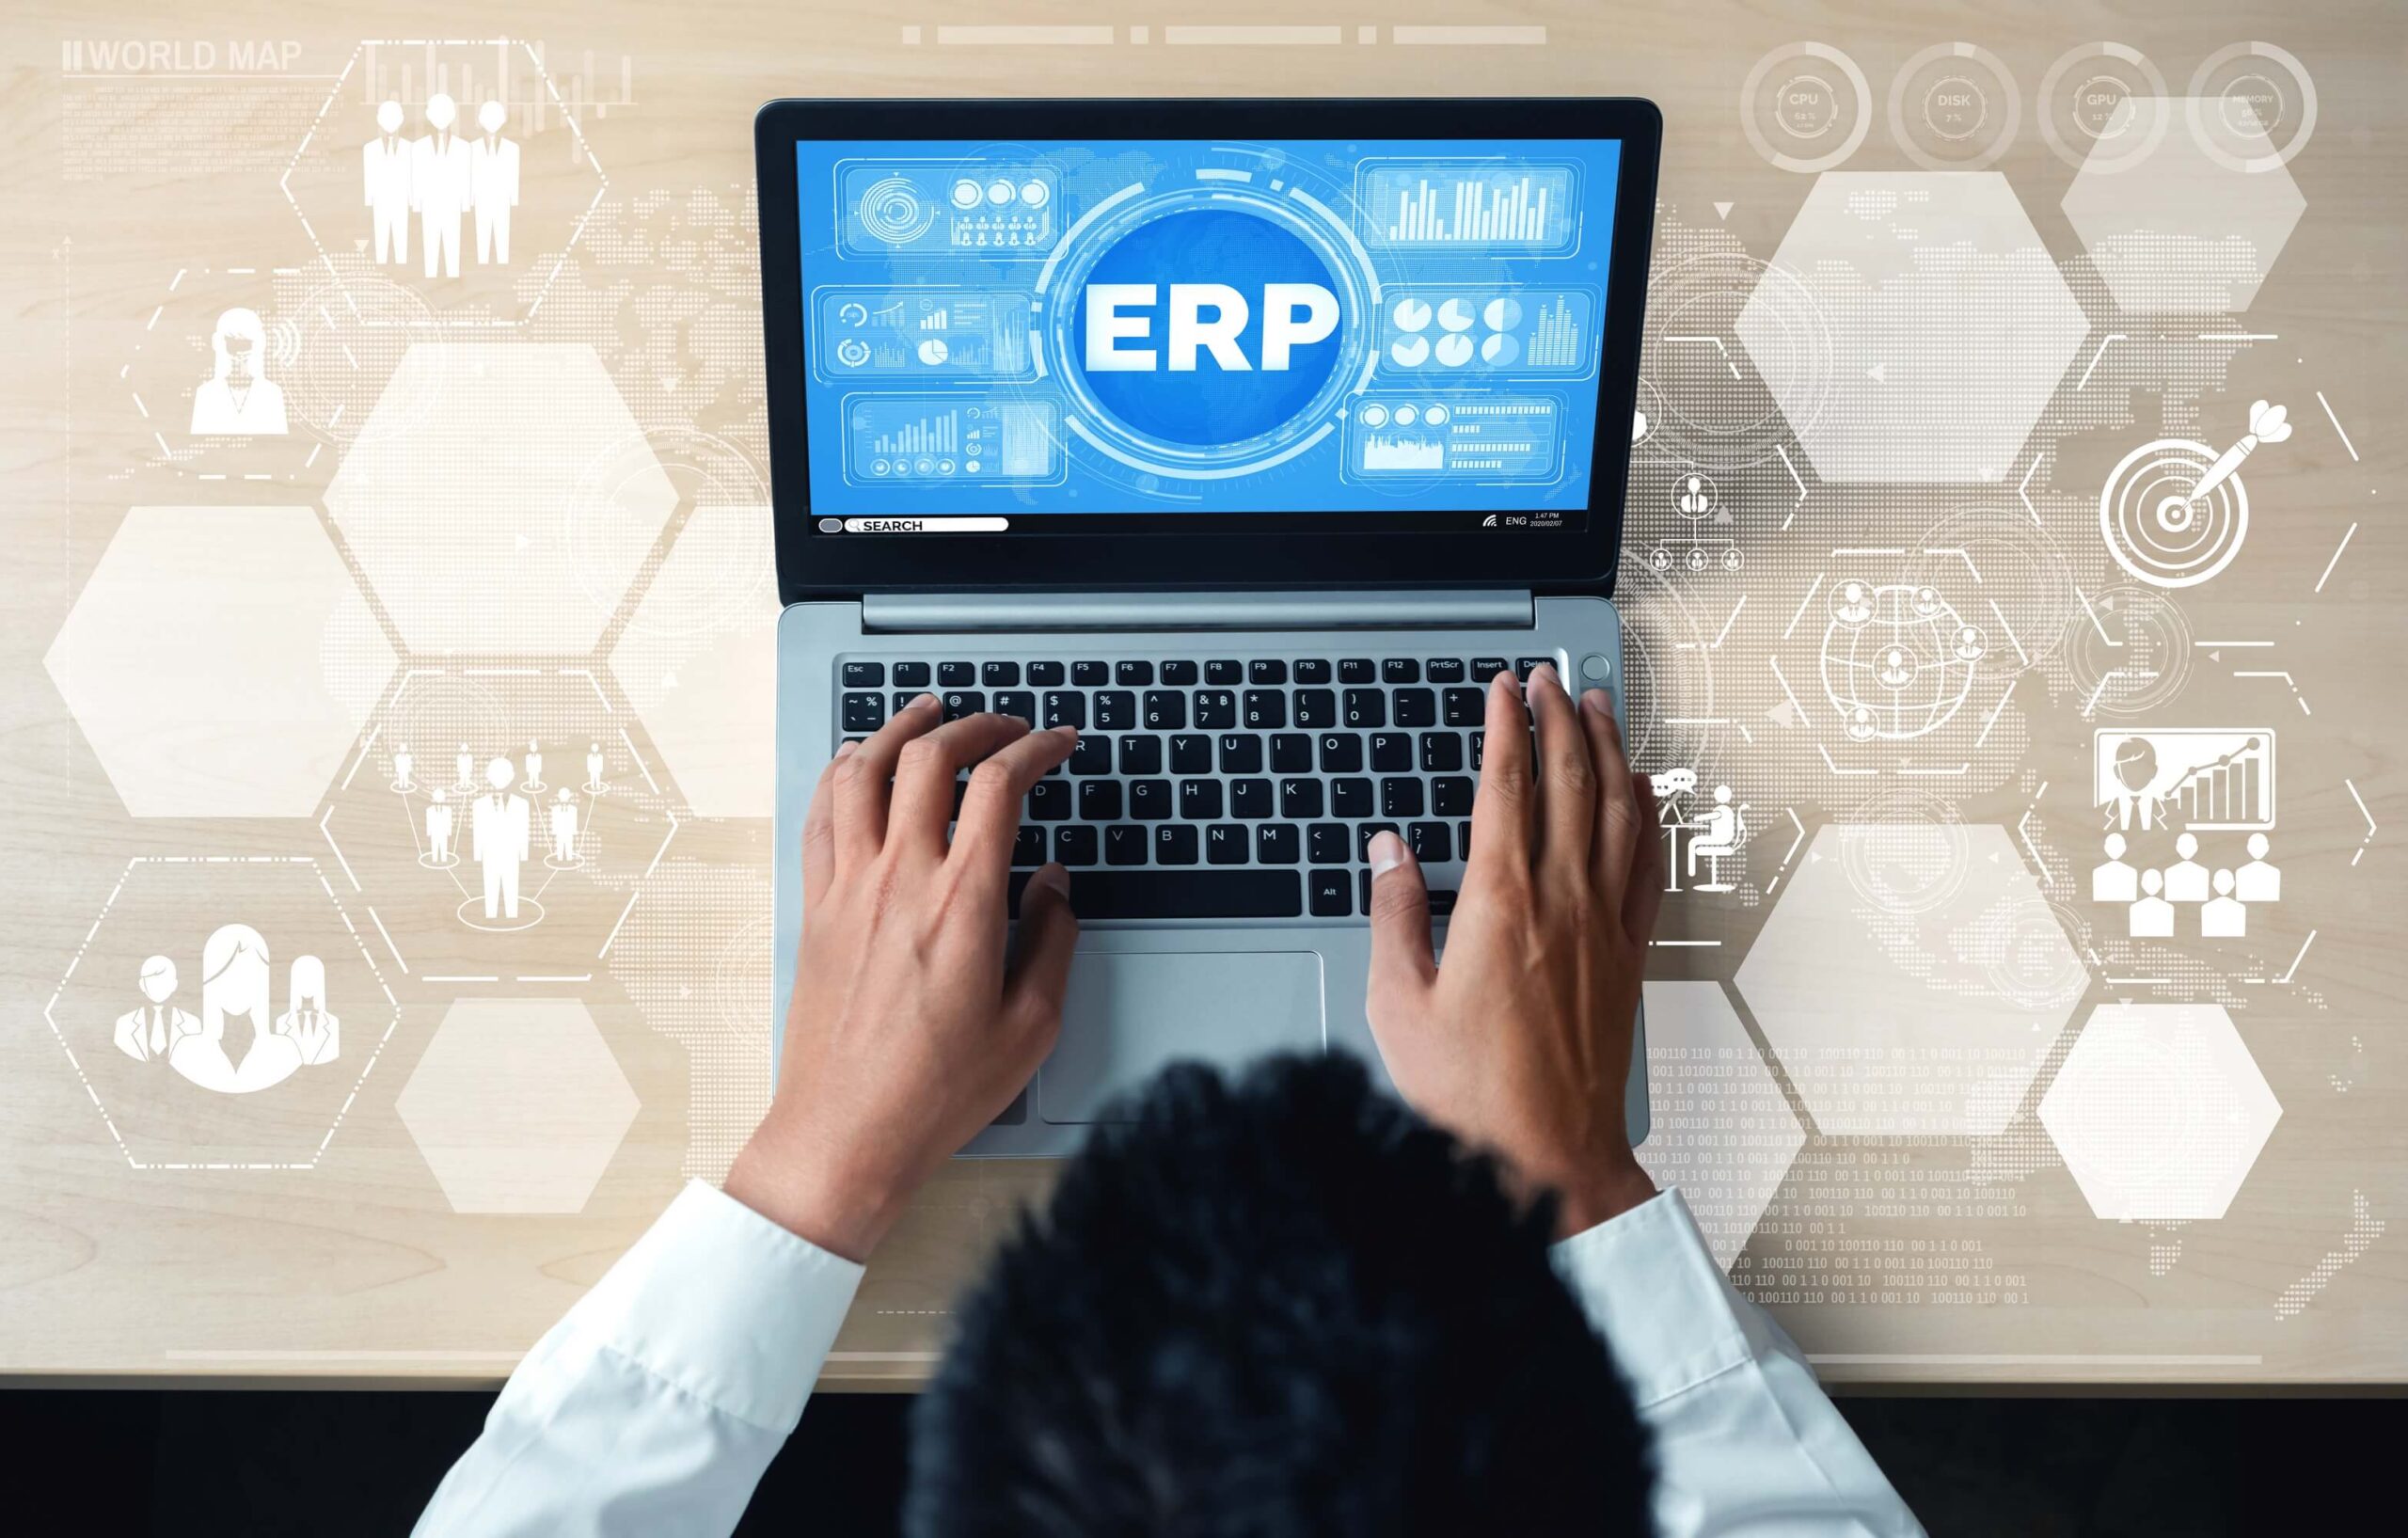 Enterprise Resource Planning (ERP) and SAP Business One